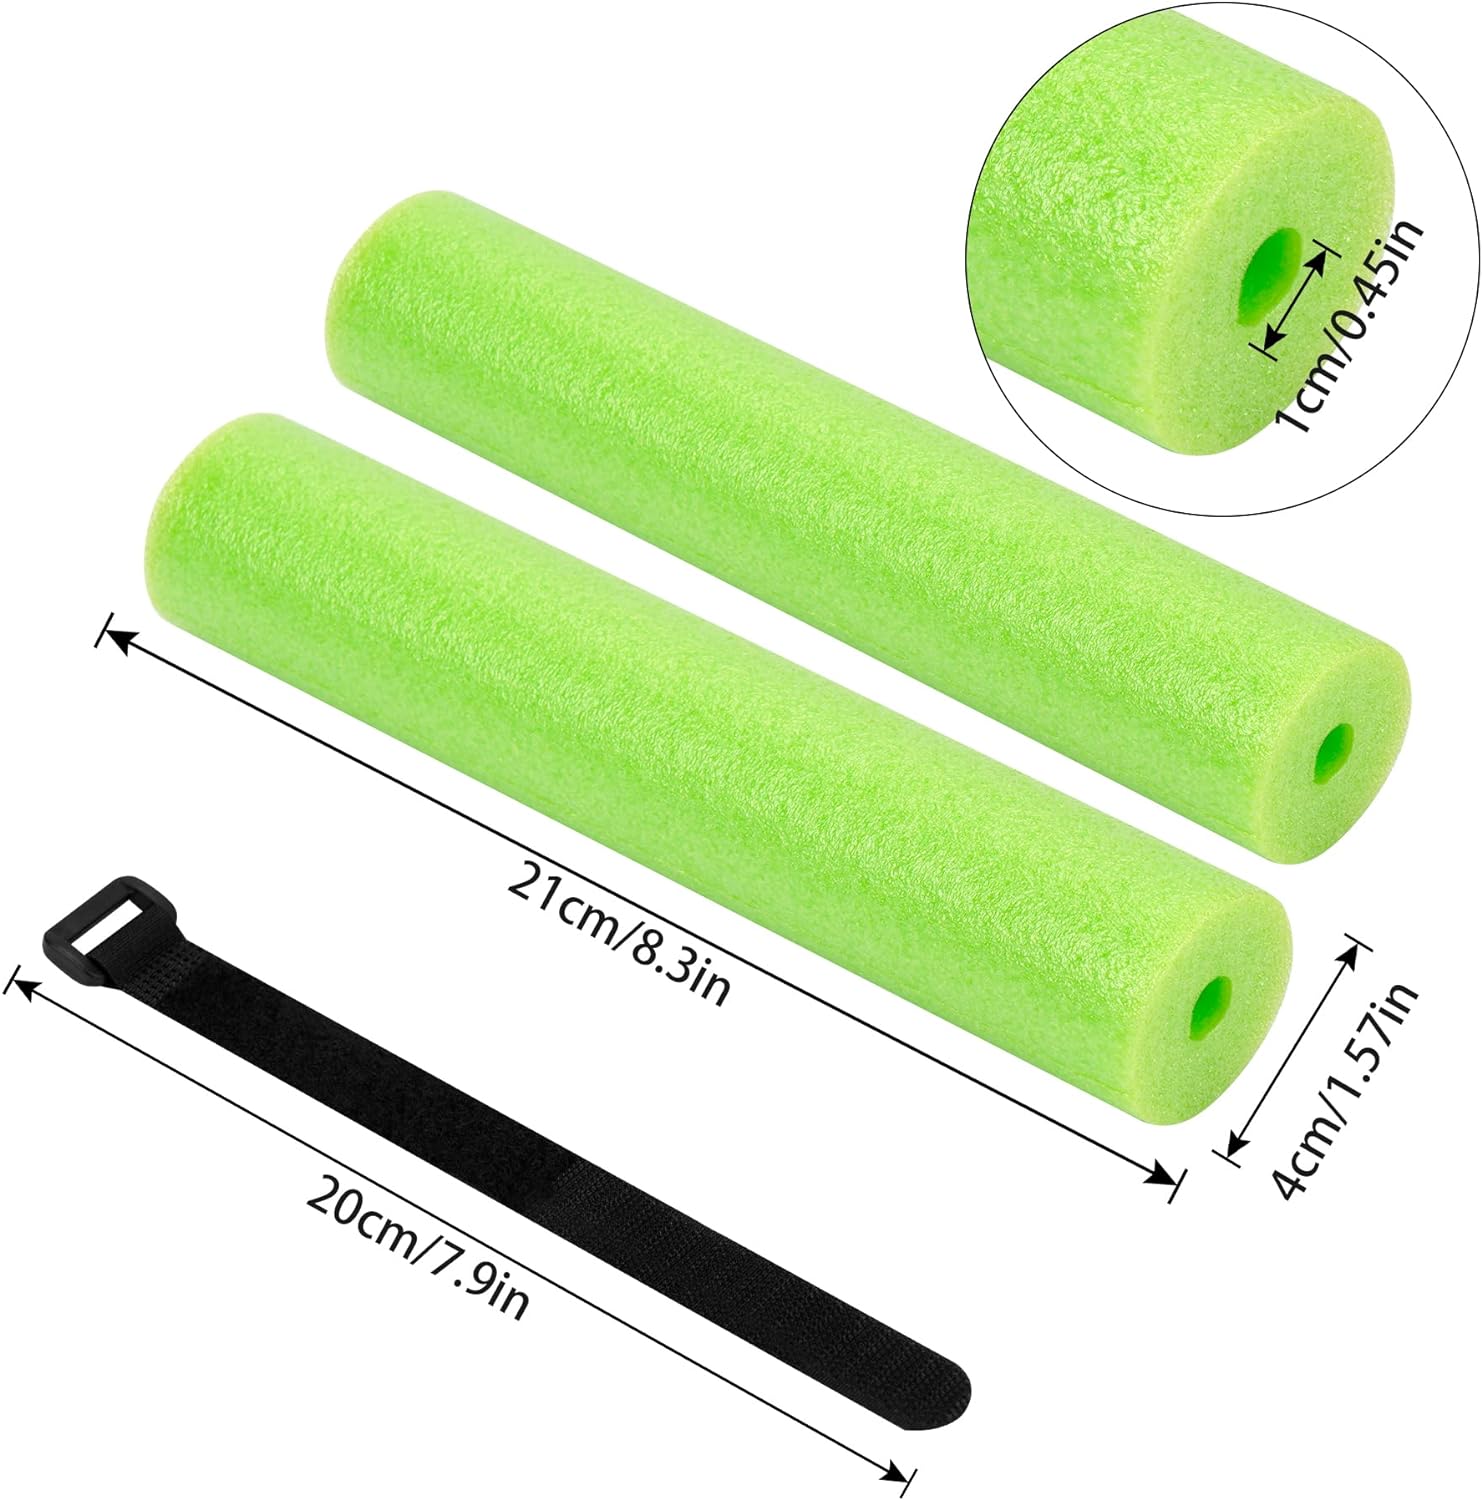 Shitailu Fishing Rod Float, Floating Rod Butt Cushion, Fishing Float Tube Accessories, Kayak Fishing Rod Floater for Prevent The Narrow Rod Goes Overboard(Include Fastening Straps )